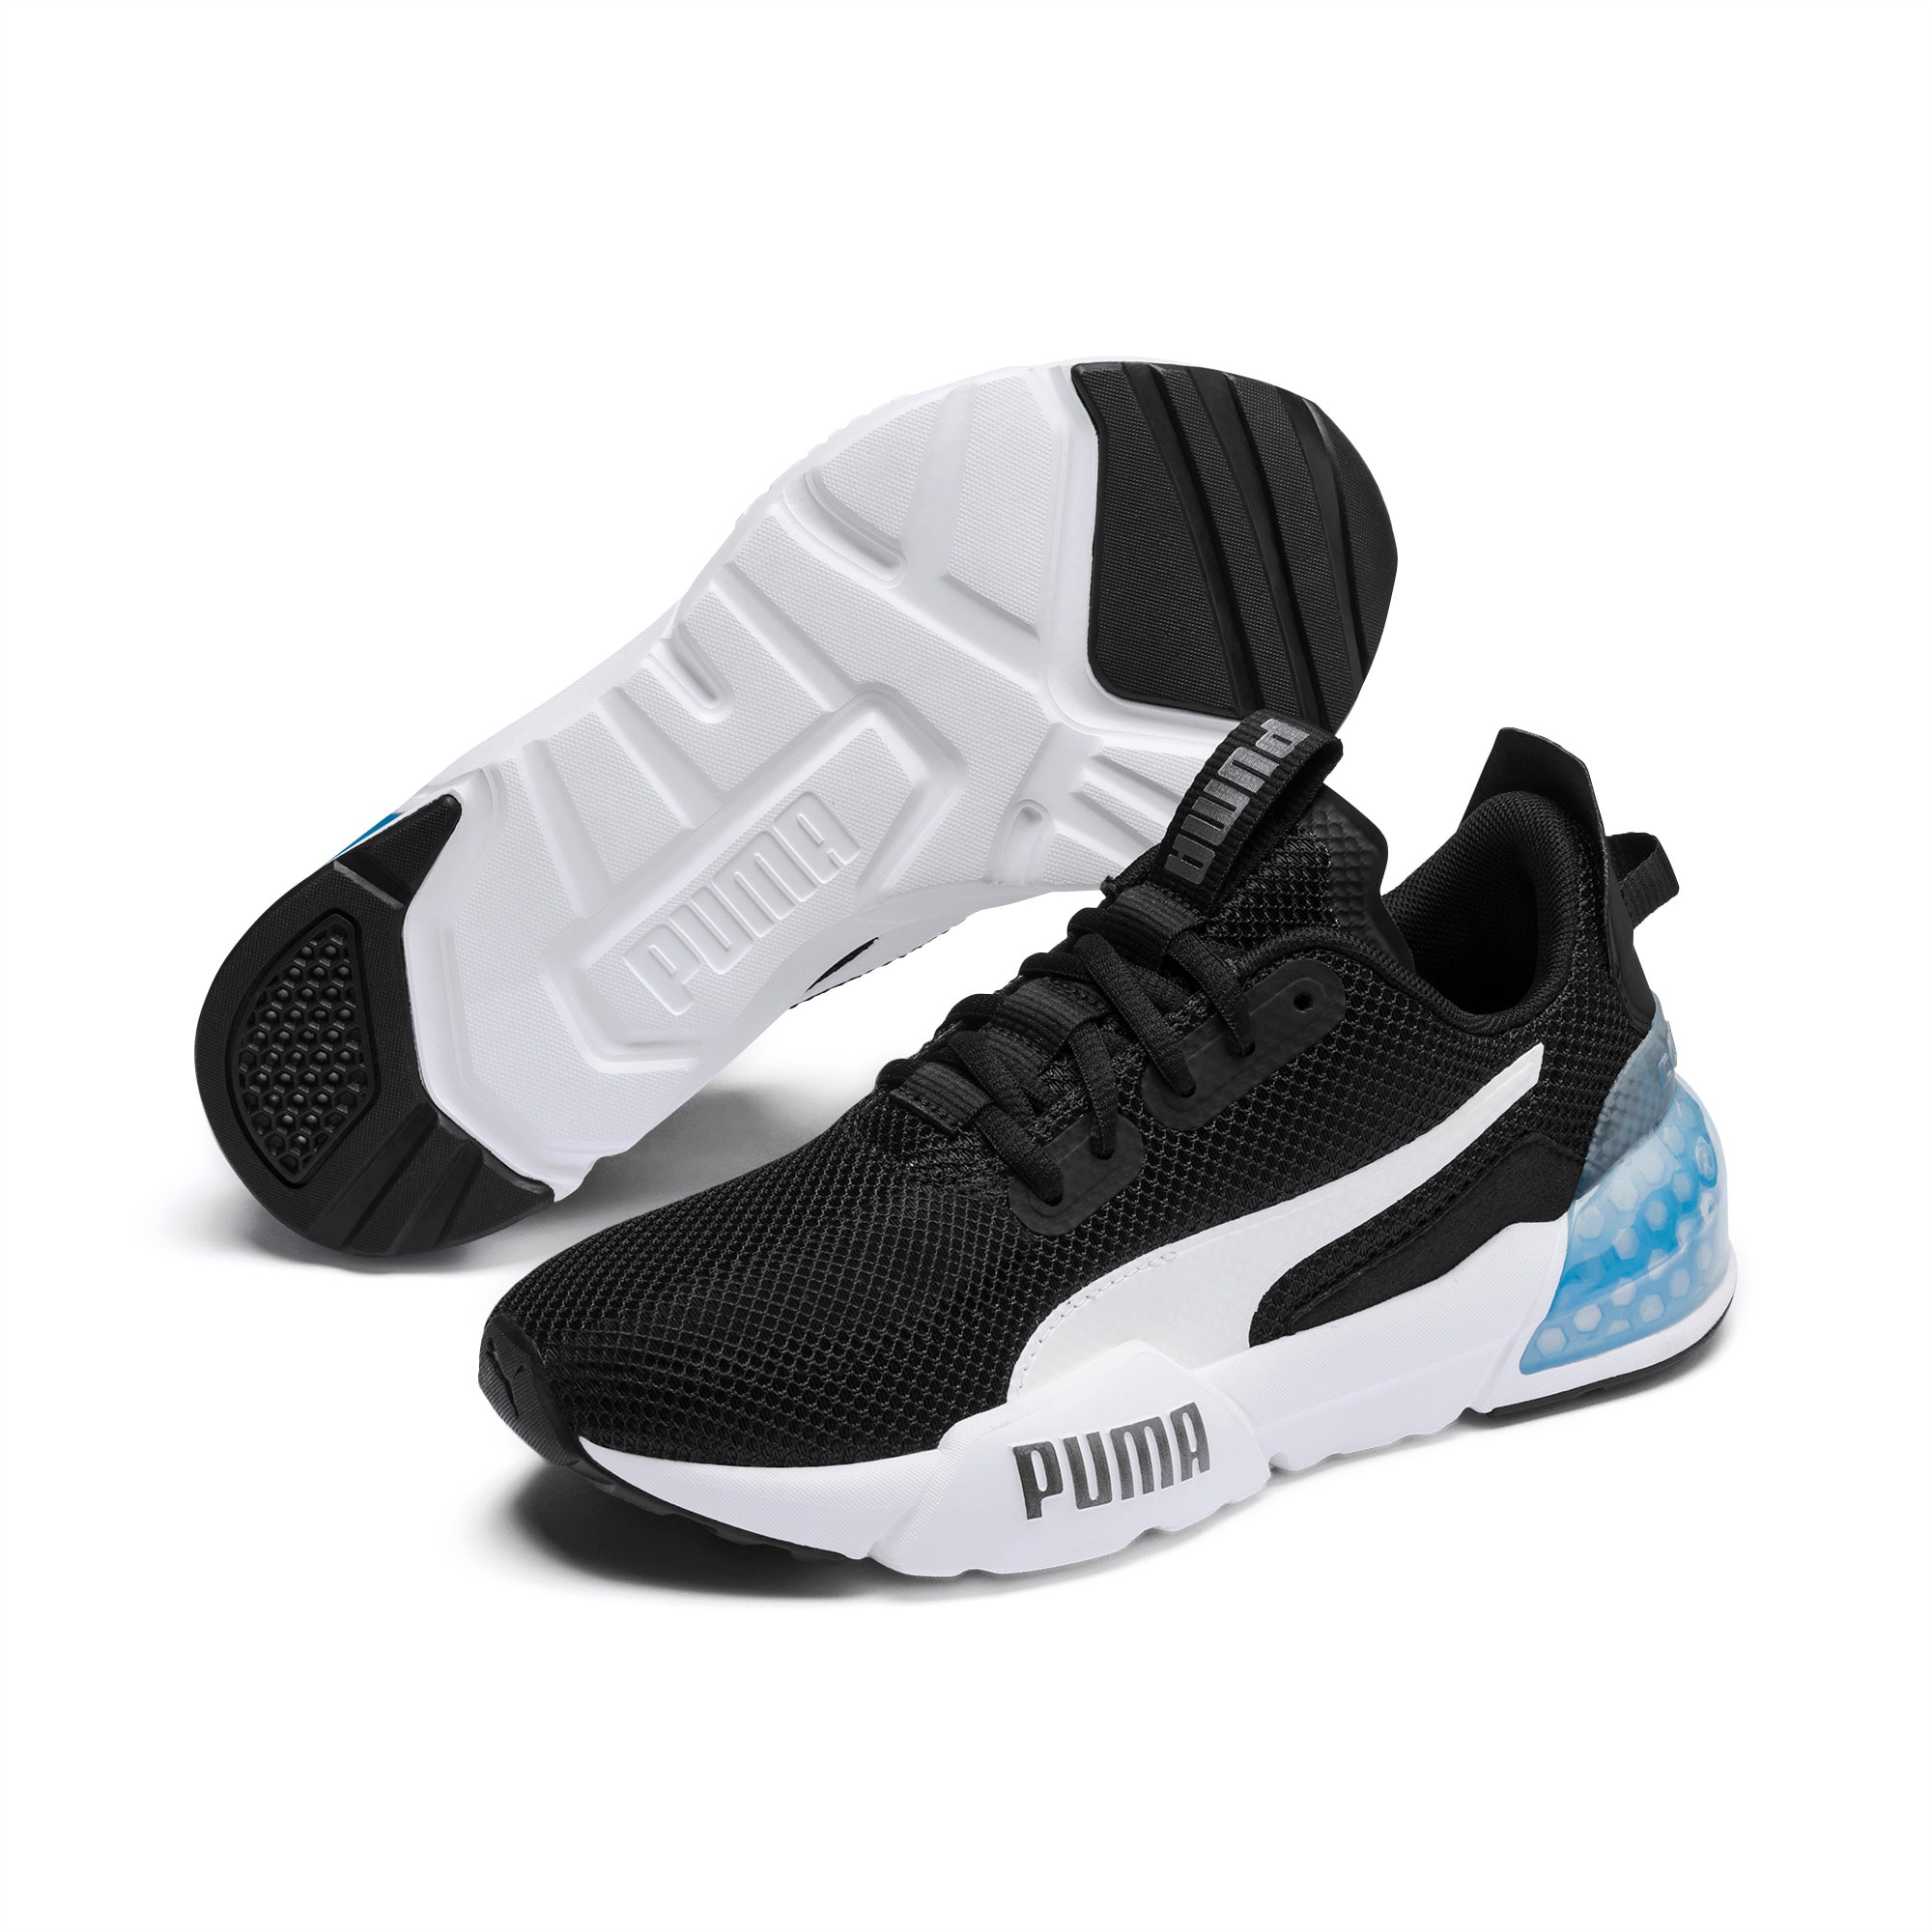 CELL Phase Women's Training Shoes | PUMA US